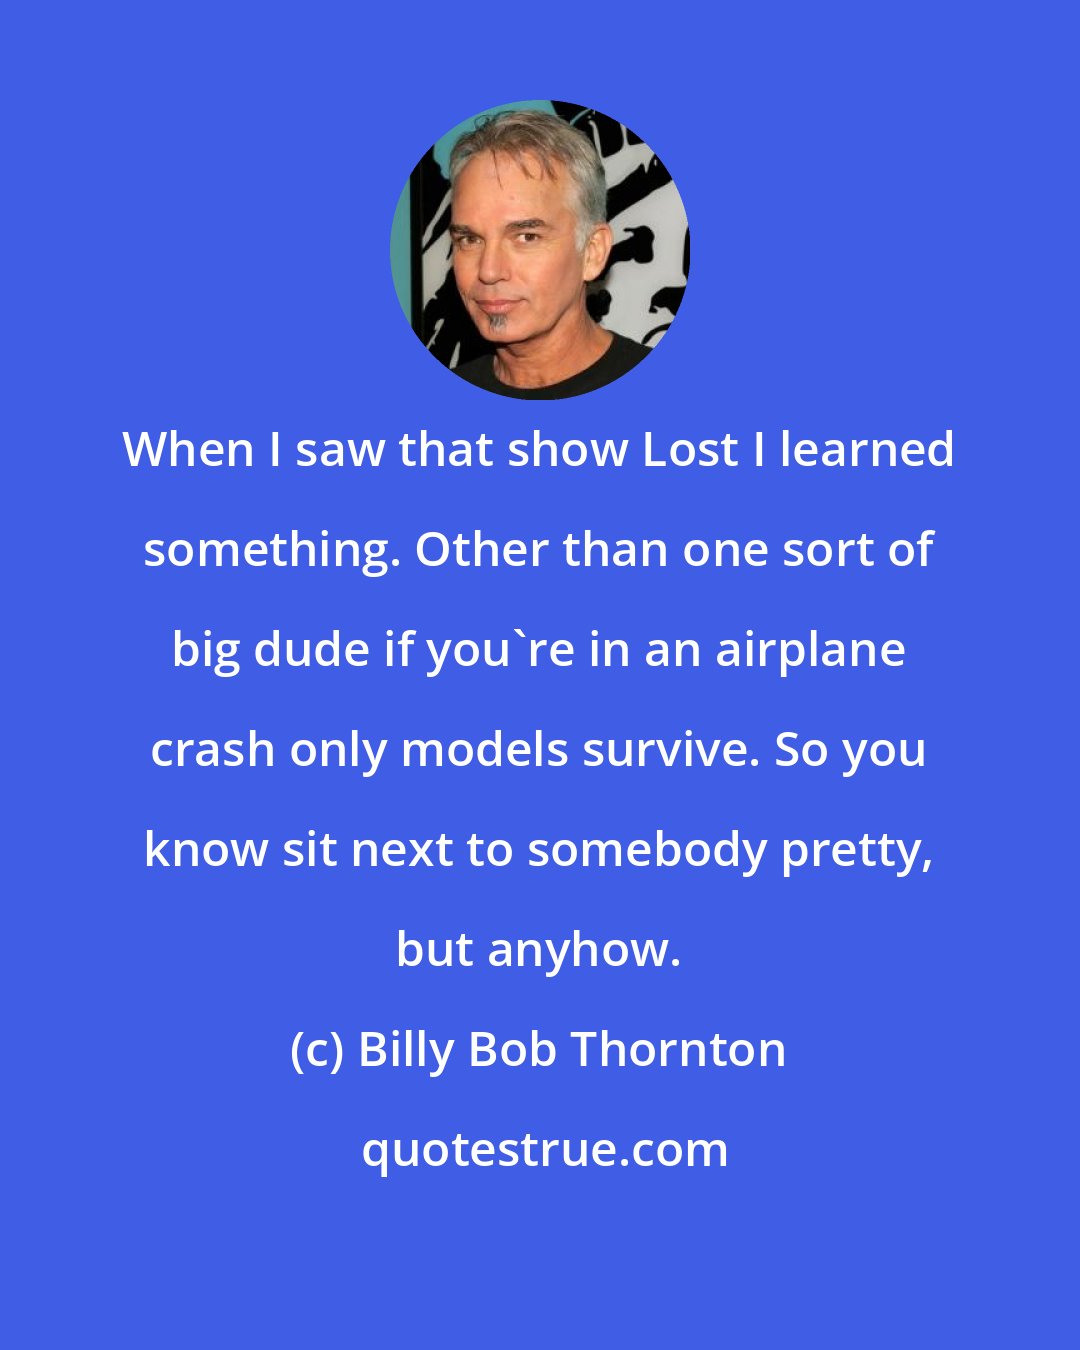 Billy Bob Thornton: When I saw that show Lost I learned something. Other than one sort of big dude if you're in an airplane crash only models survive. So you know sit next to somebody pretty, but anyhow.